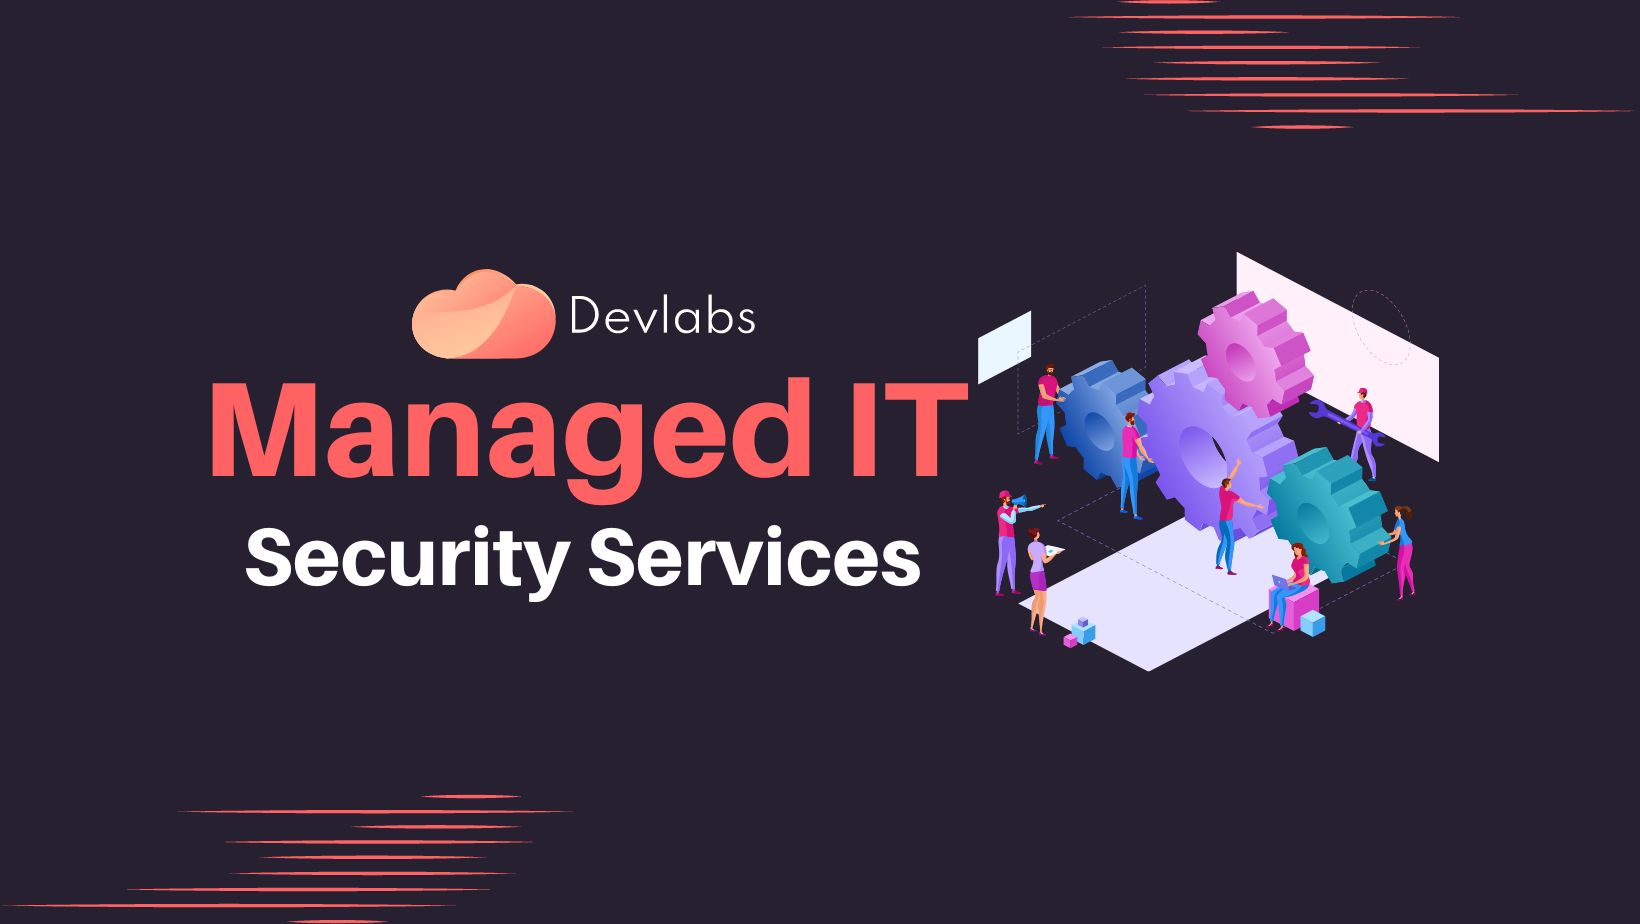 Managed IT Security Services - Devlabs Global